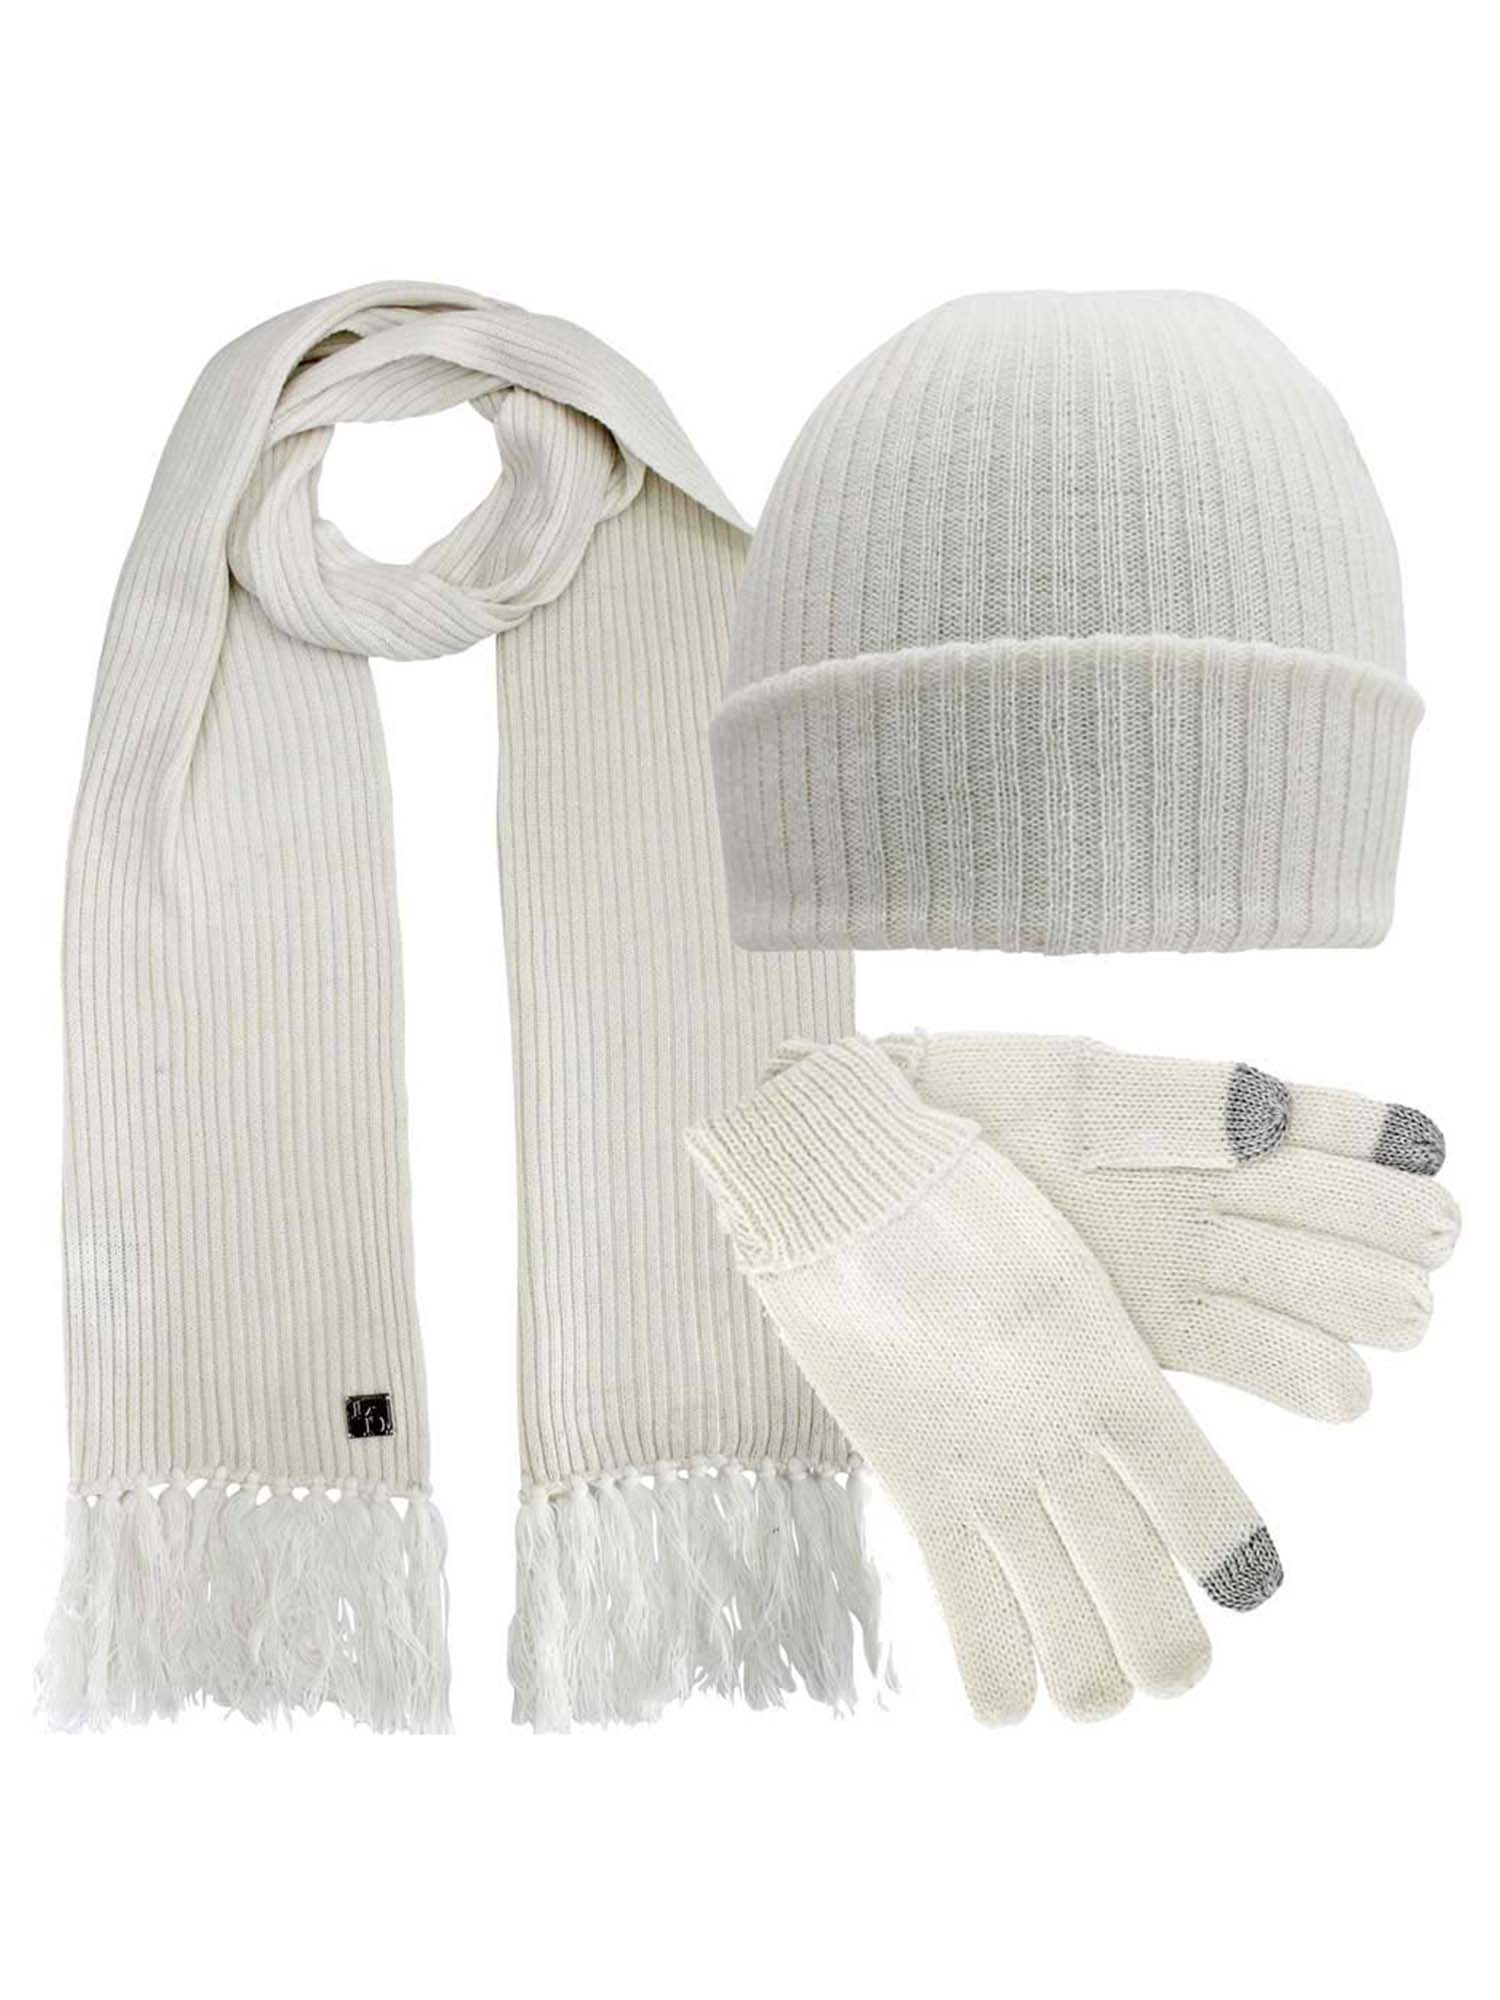 Hats and Gloves - Men Luxury Collection